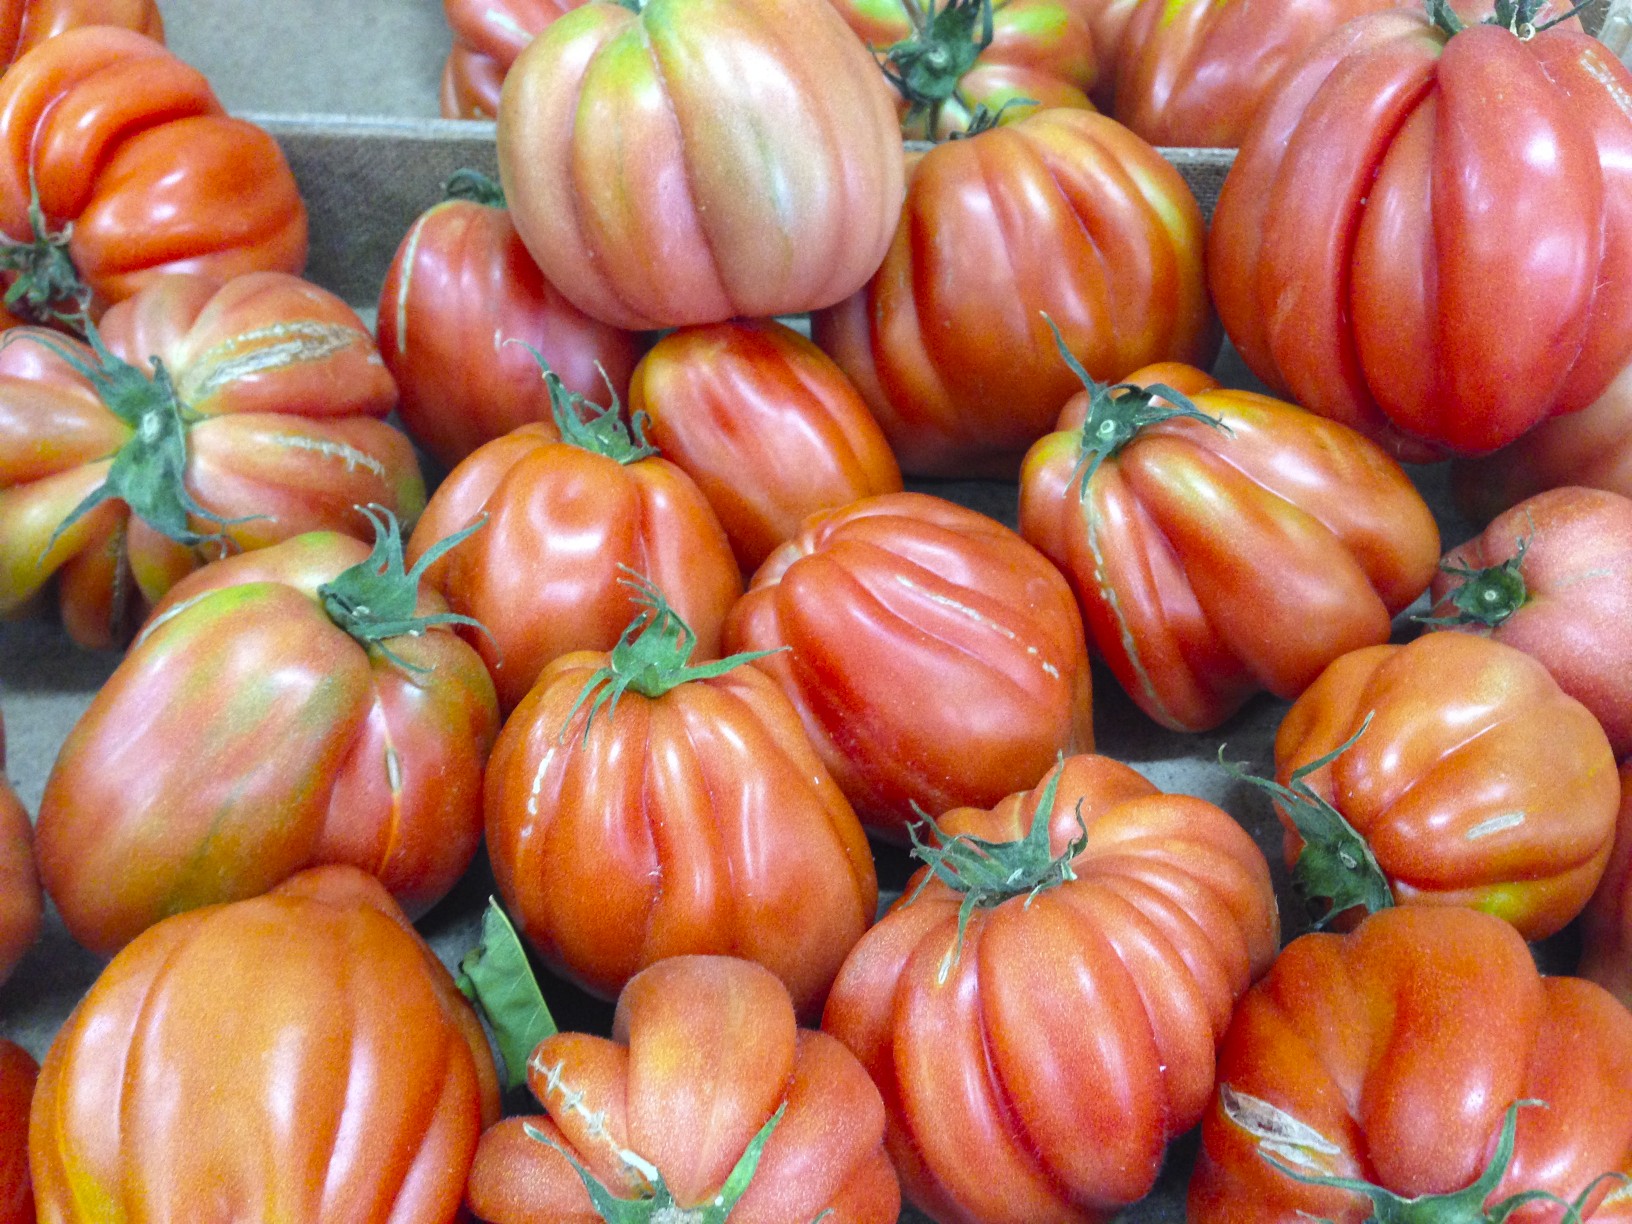 Tomatoes from Southern Italy - Sorrento Food Tours